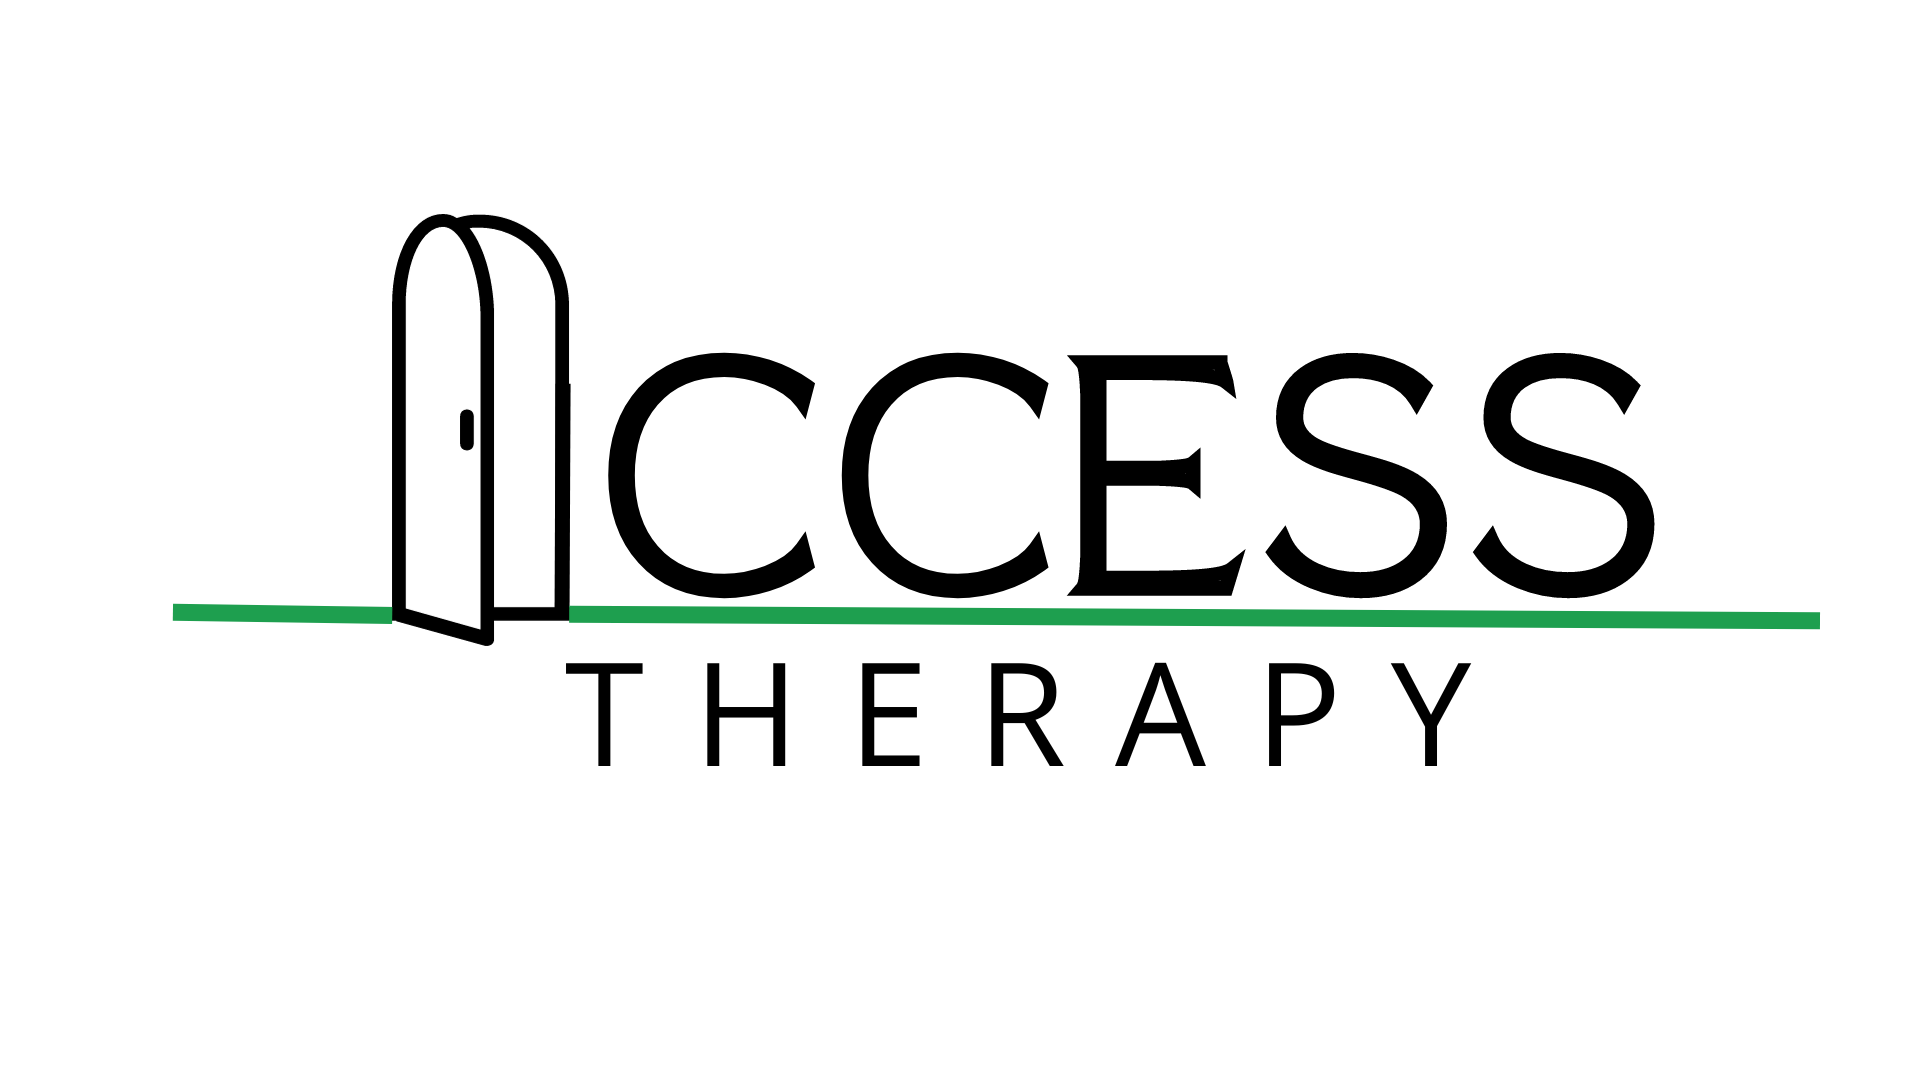 Access Therapy